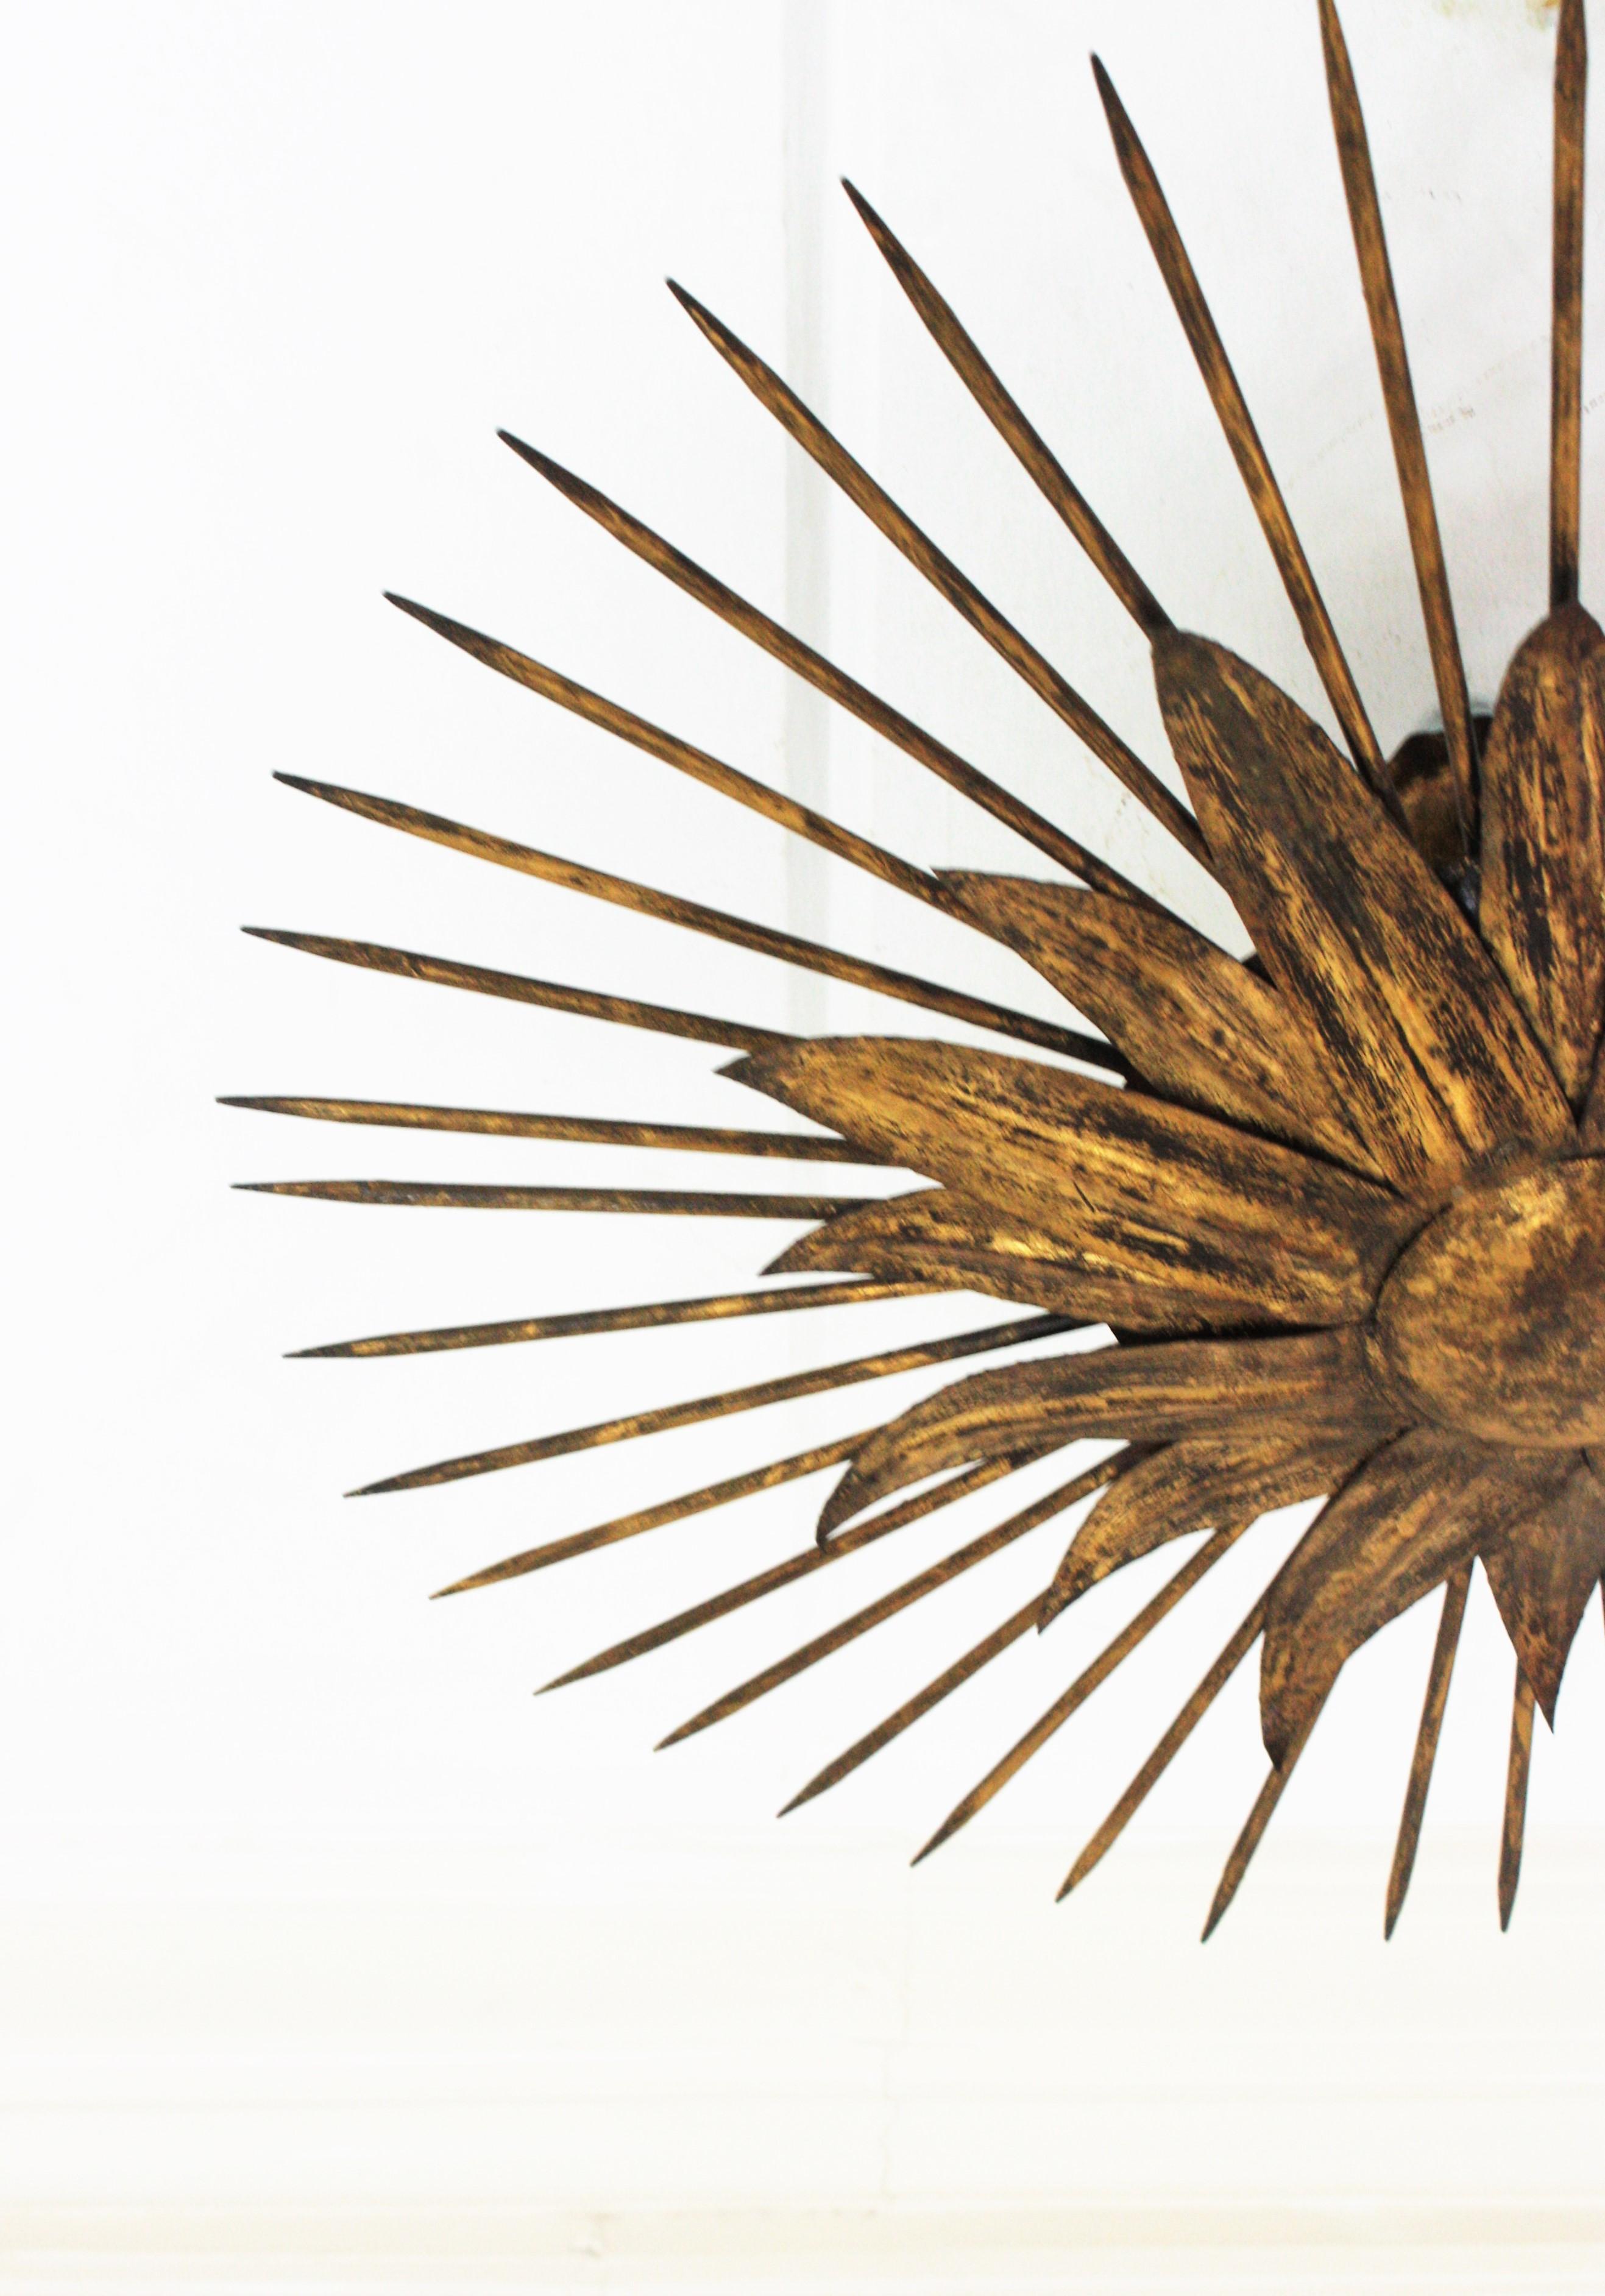 French Sunburst Light Fixture in Gilt Iron with Nail Detail, 1940s For Sale 3